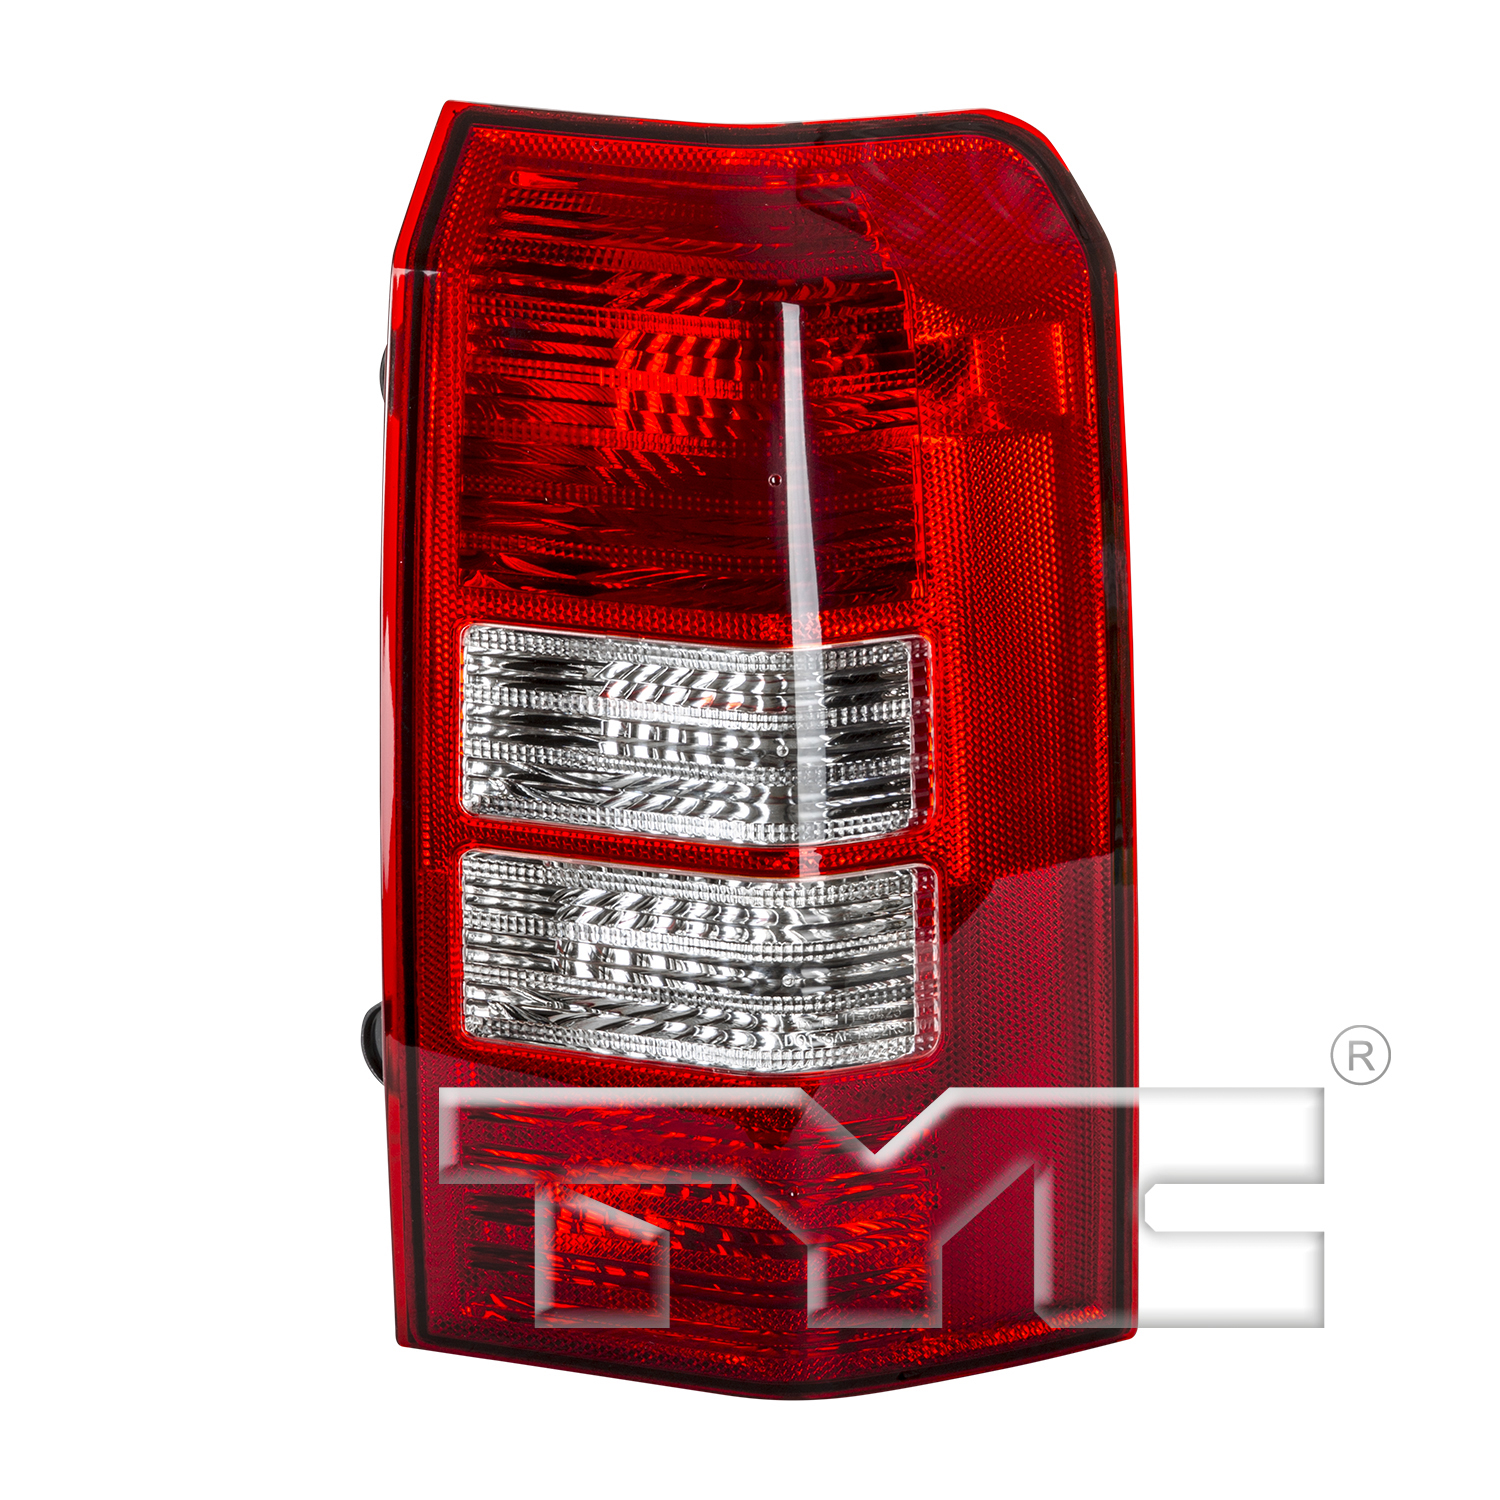 Aftermarket TAILLIGHTS for JEEP - PATRIOT, PATRIOT,08-17,RT Taillamp assy